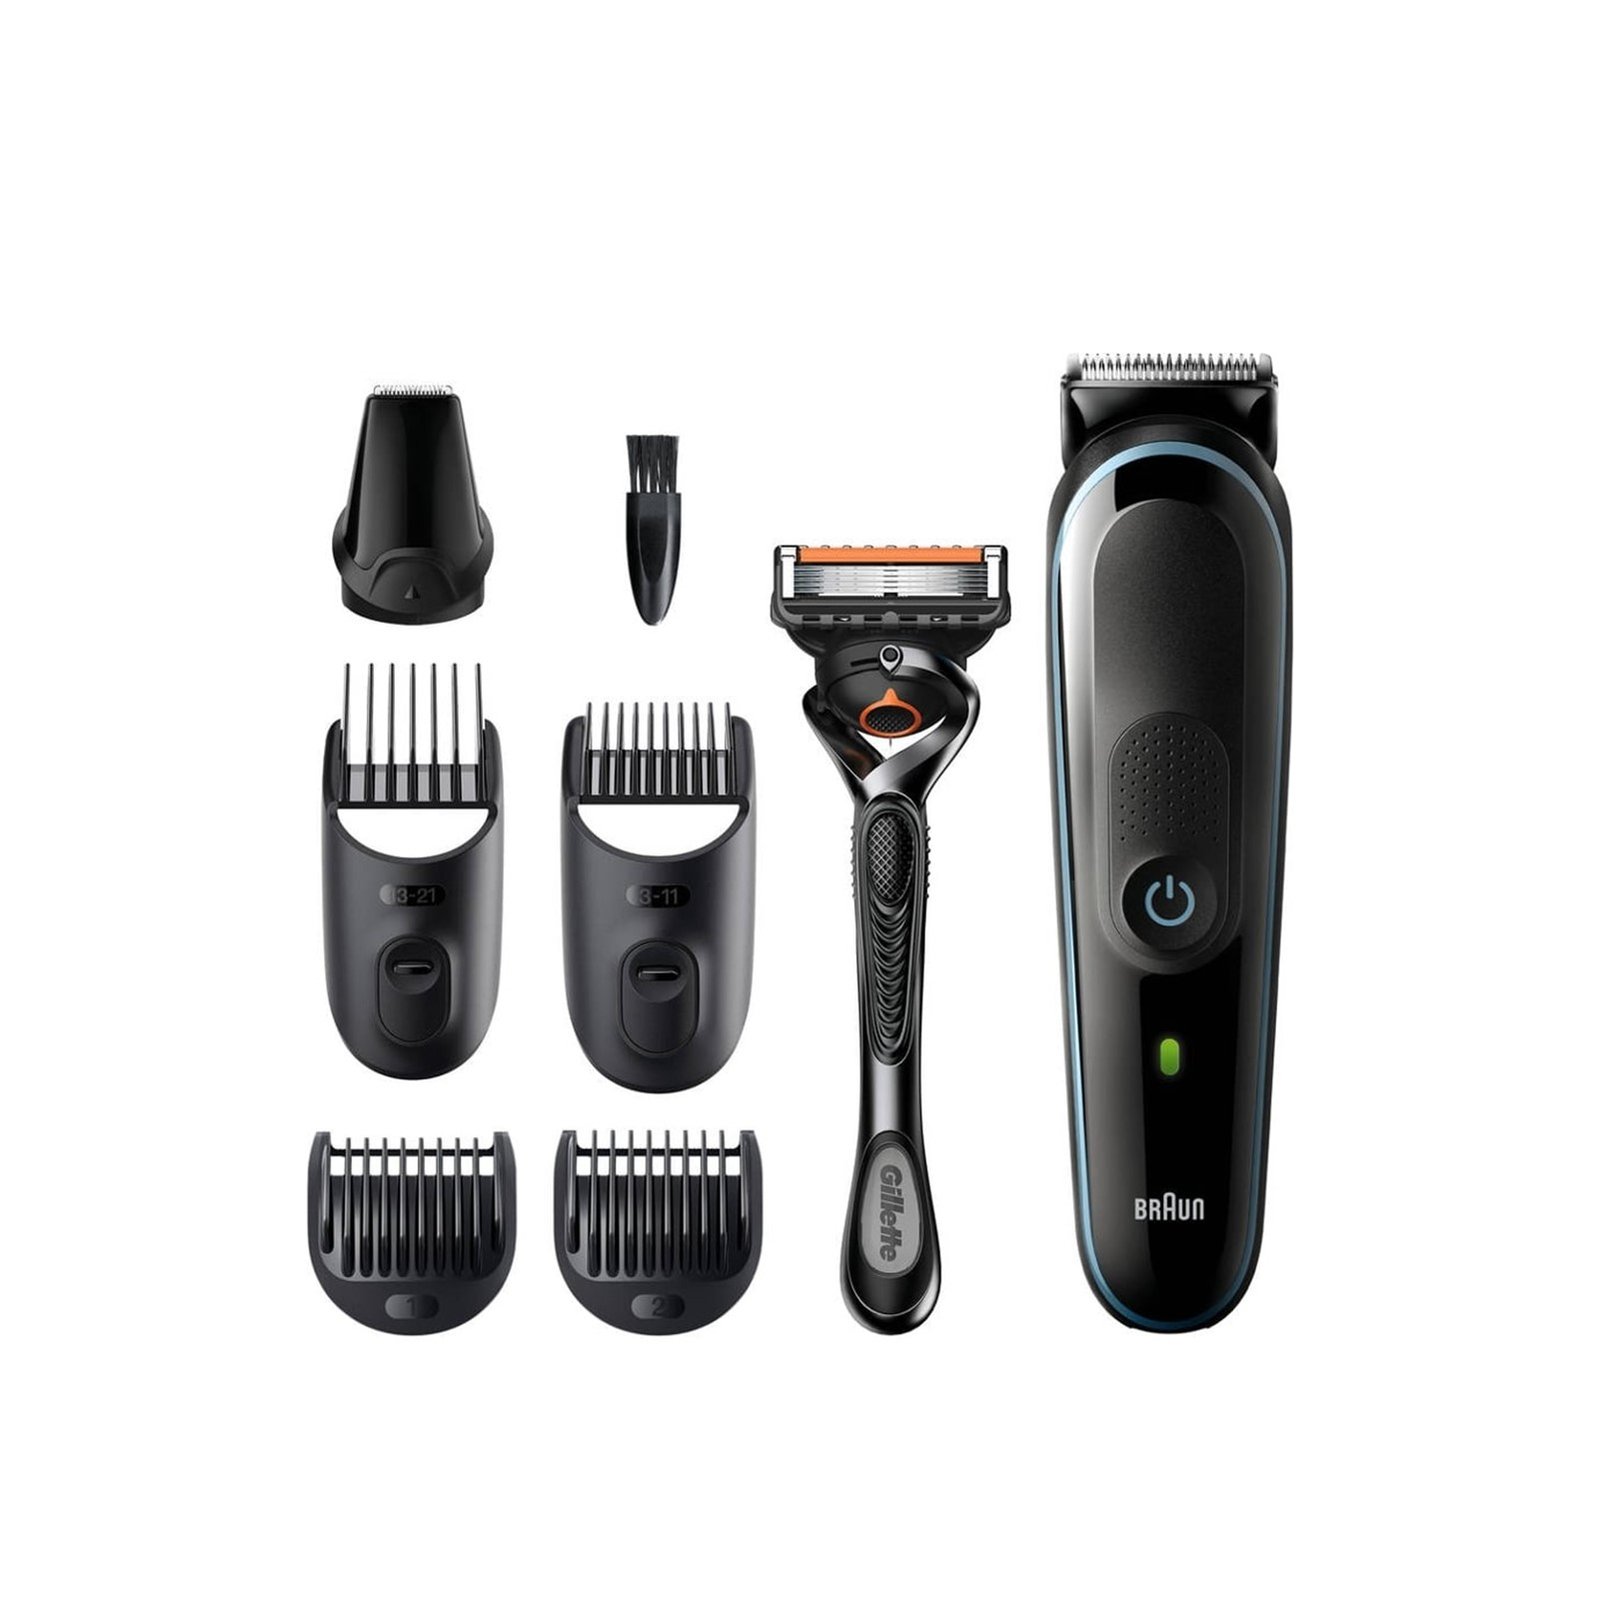 All-In-One USA Styling · Trimmer MGK3345 Kit 3 Buy Braun